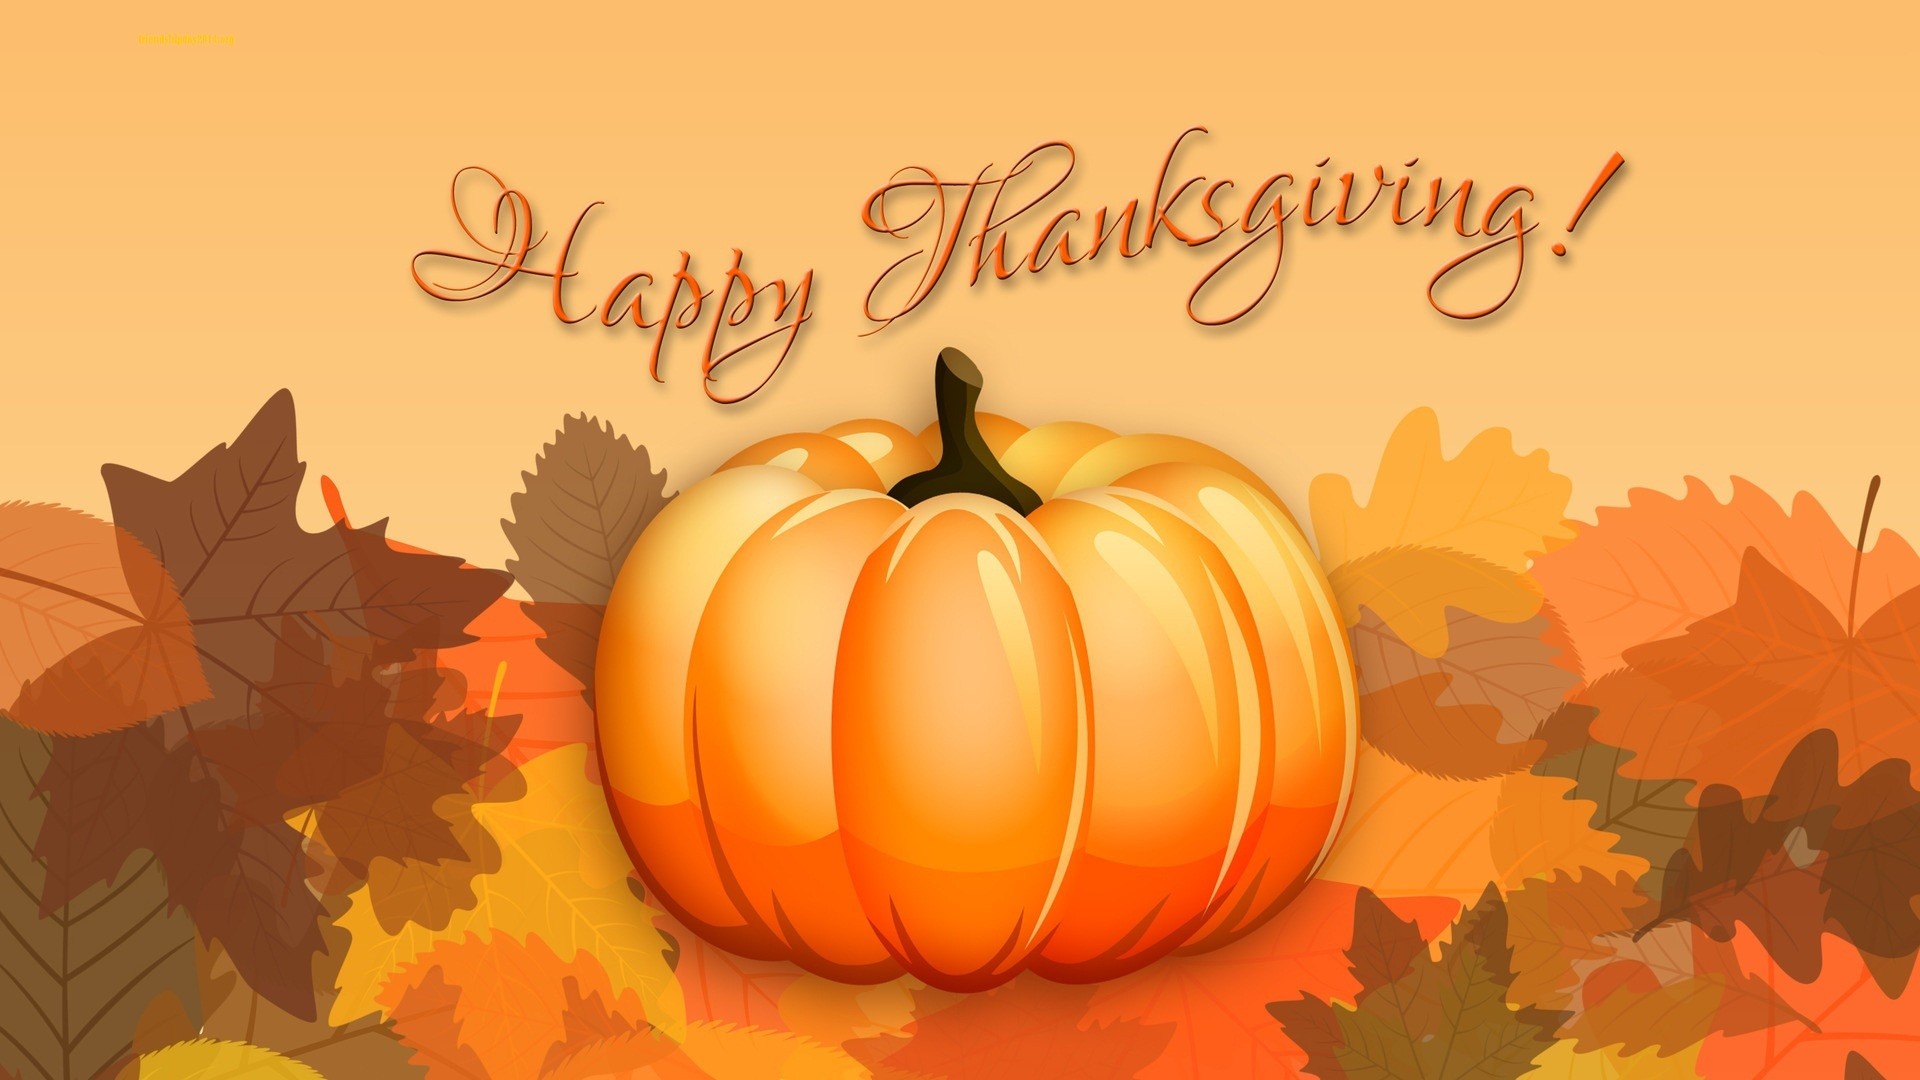 Thanksgiving Wallpaper Backgrounds - Happy Thanksgiving Wallpaper Hd , HD Wallpaper & Backgrounds